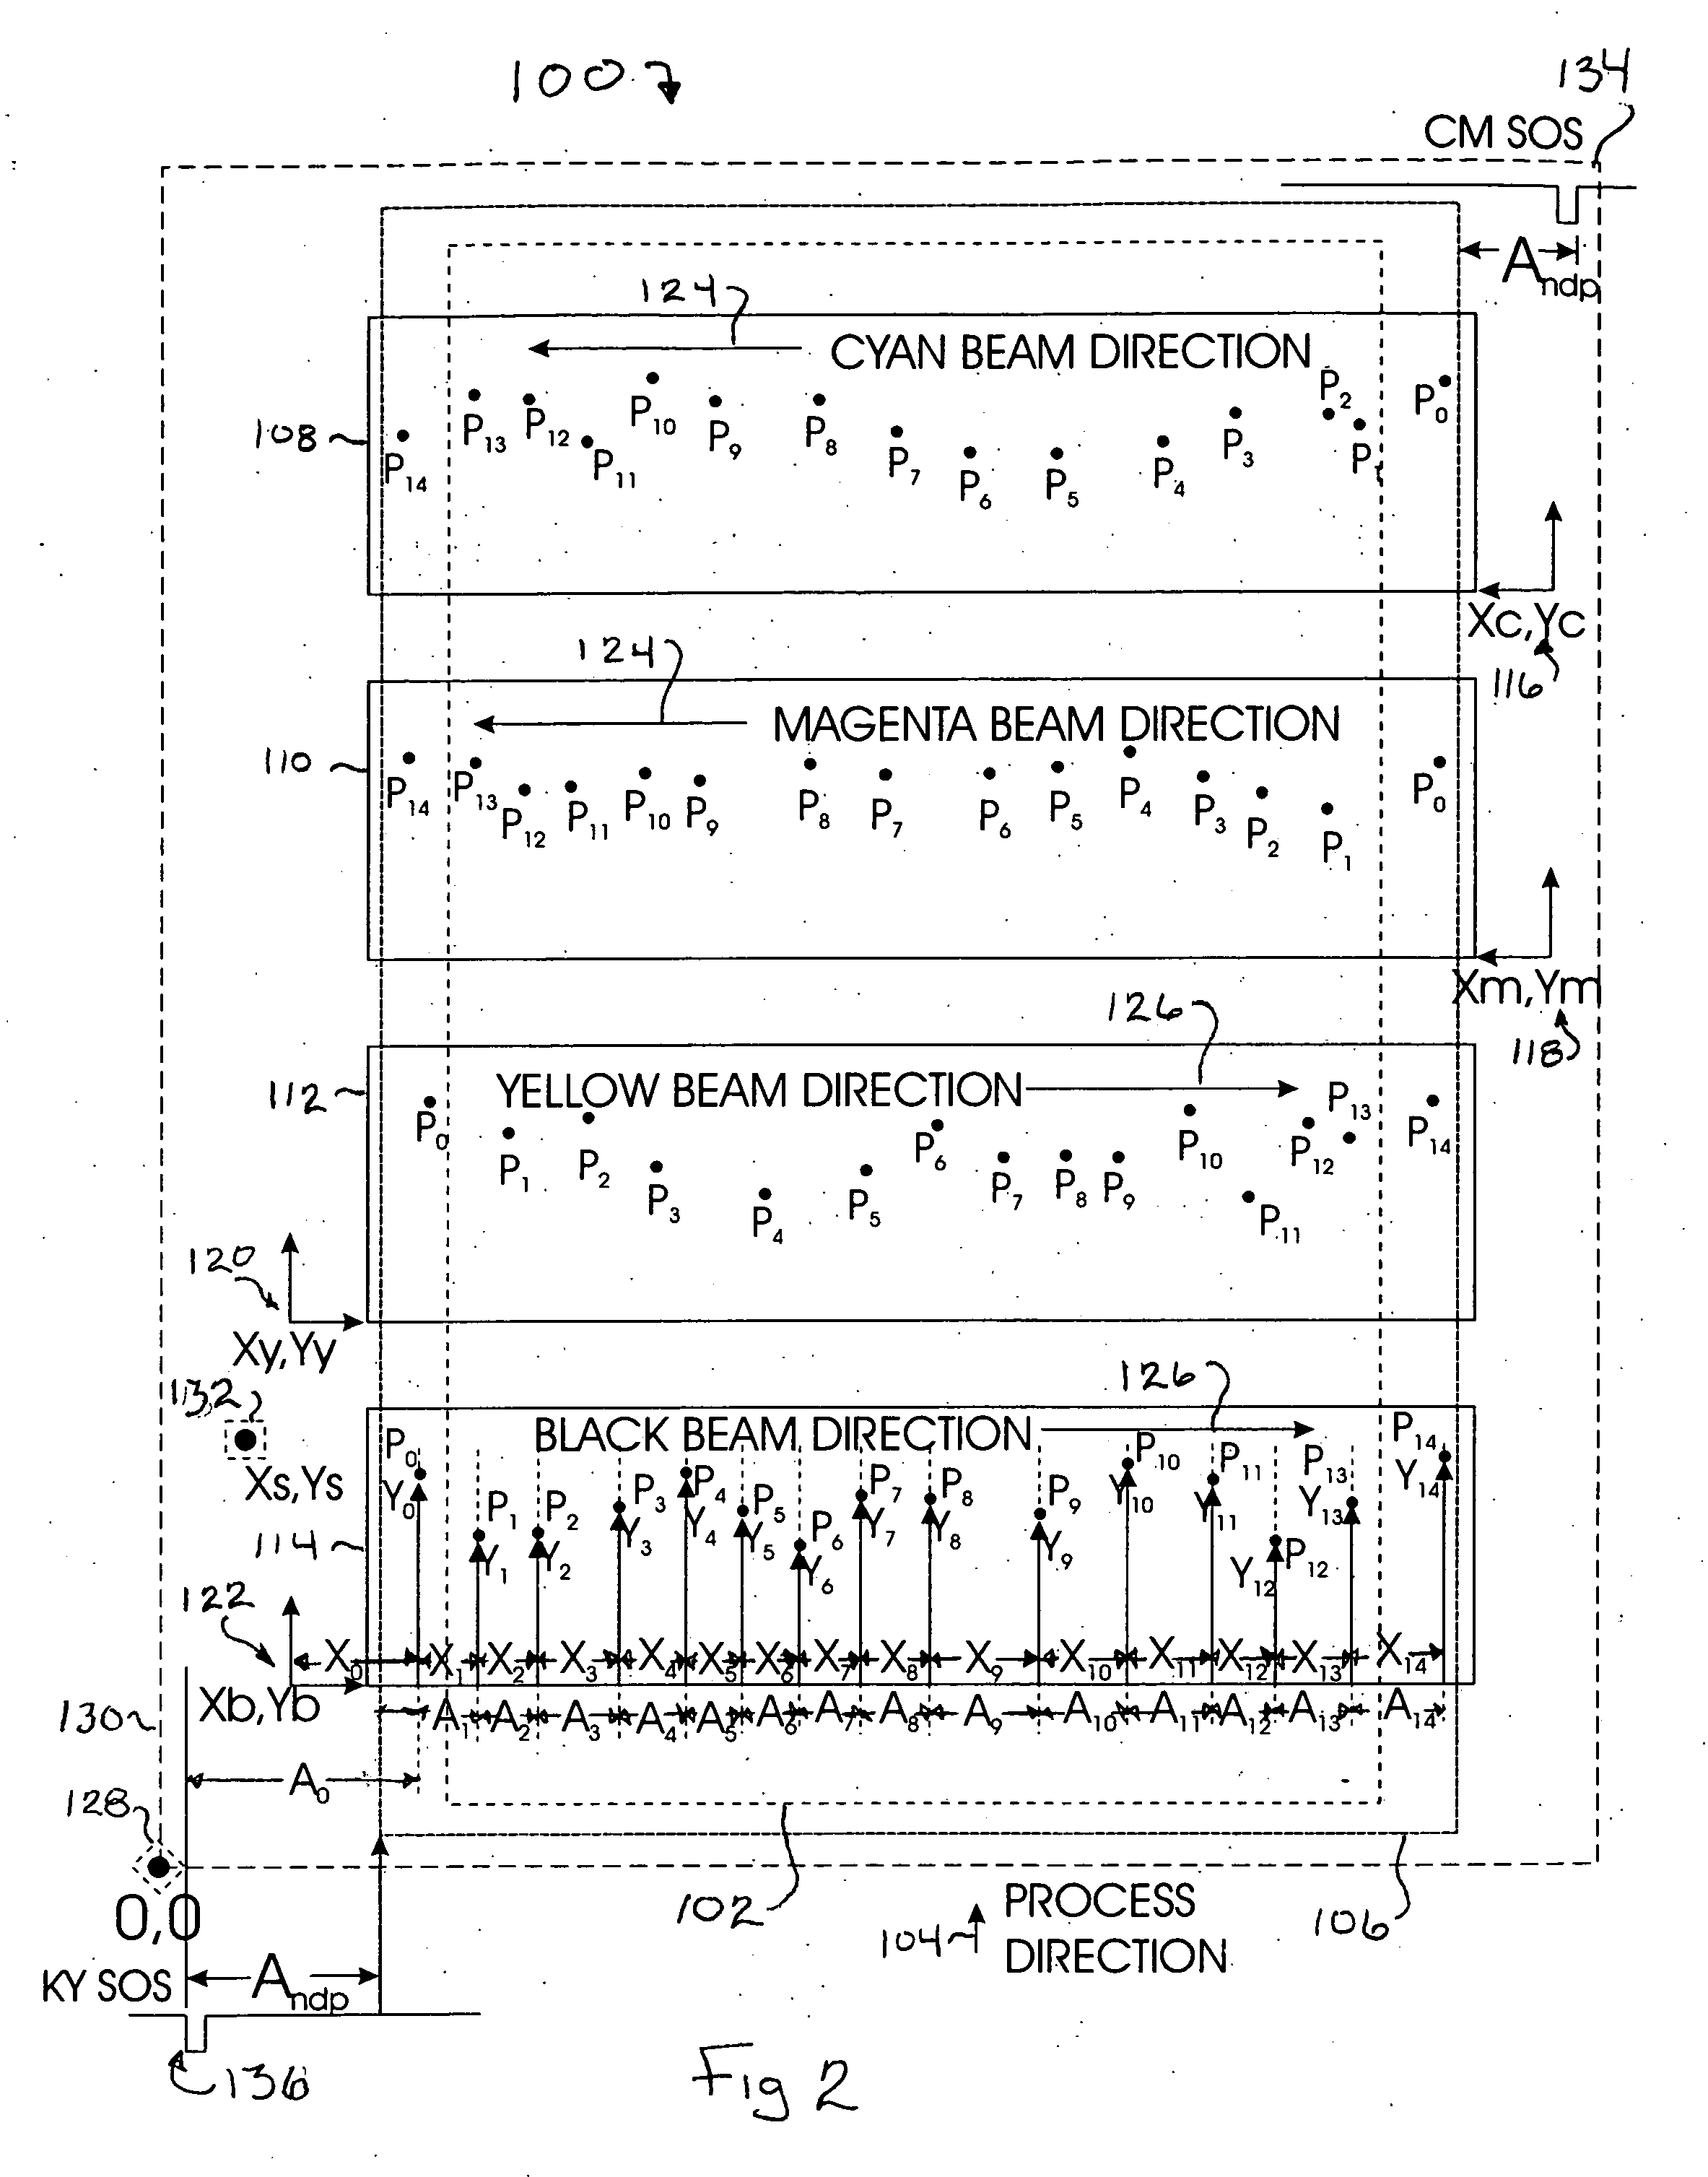 Memory device on optical scanner and apparatus and method for storing characterizing information on the memory device